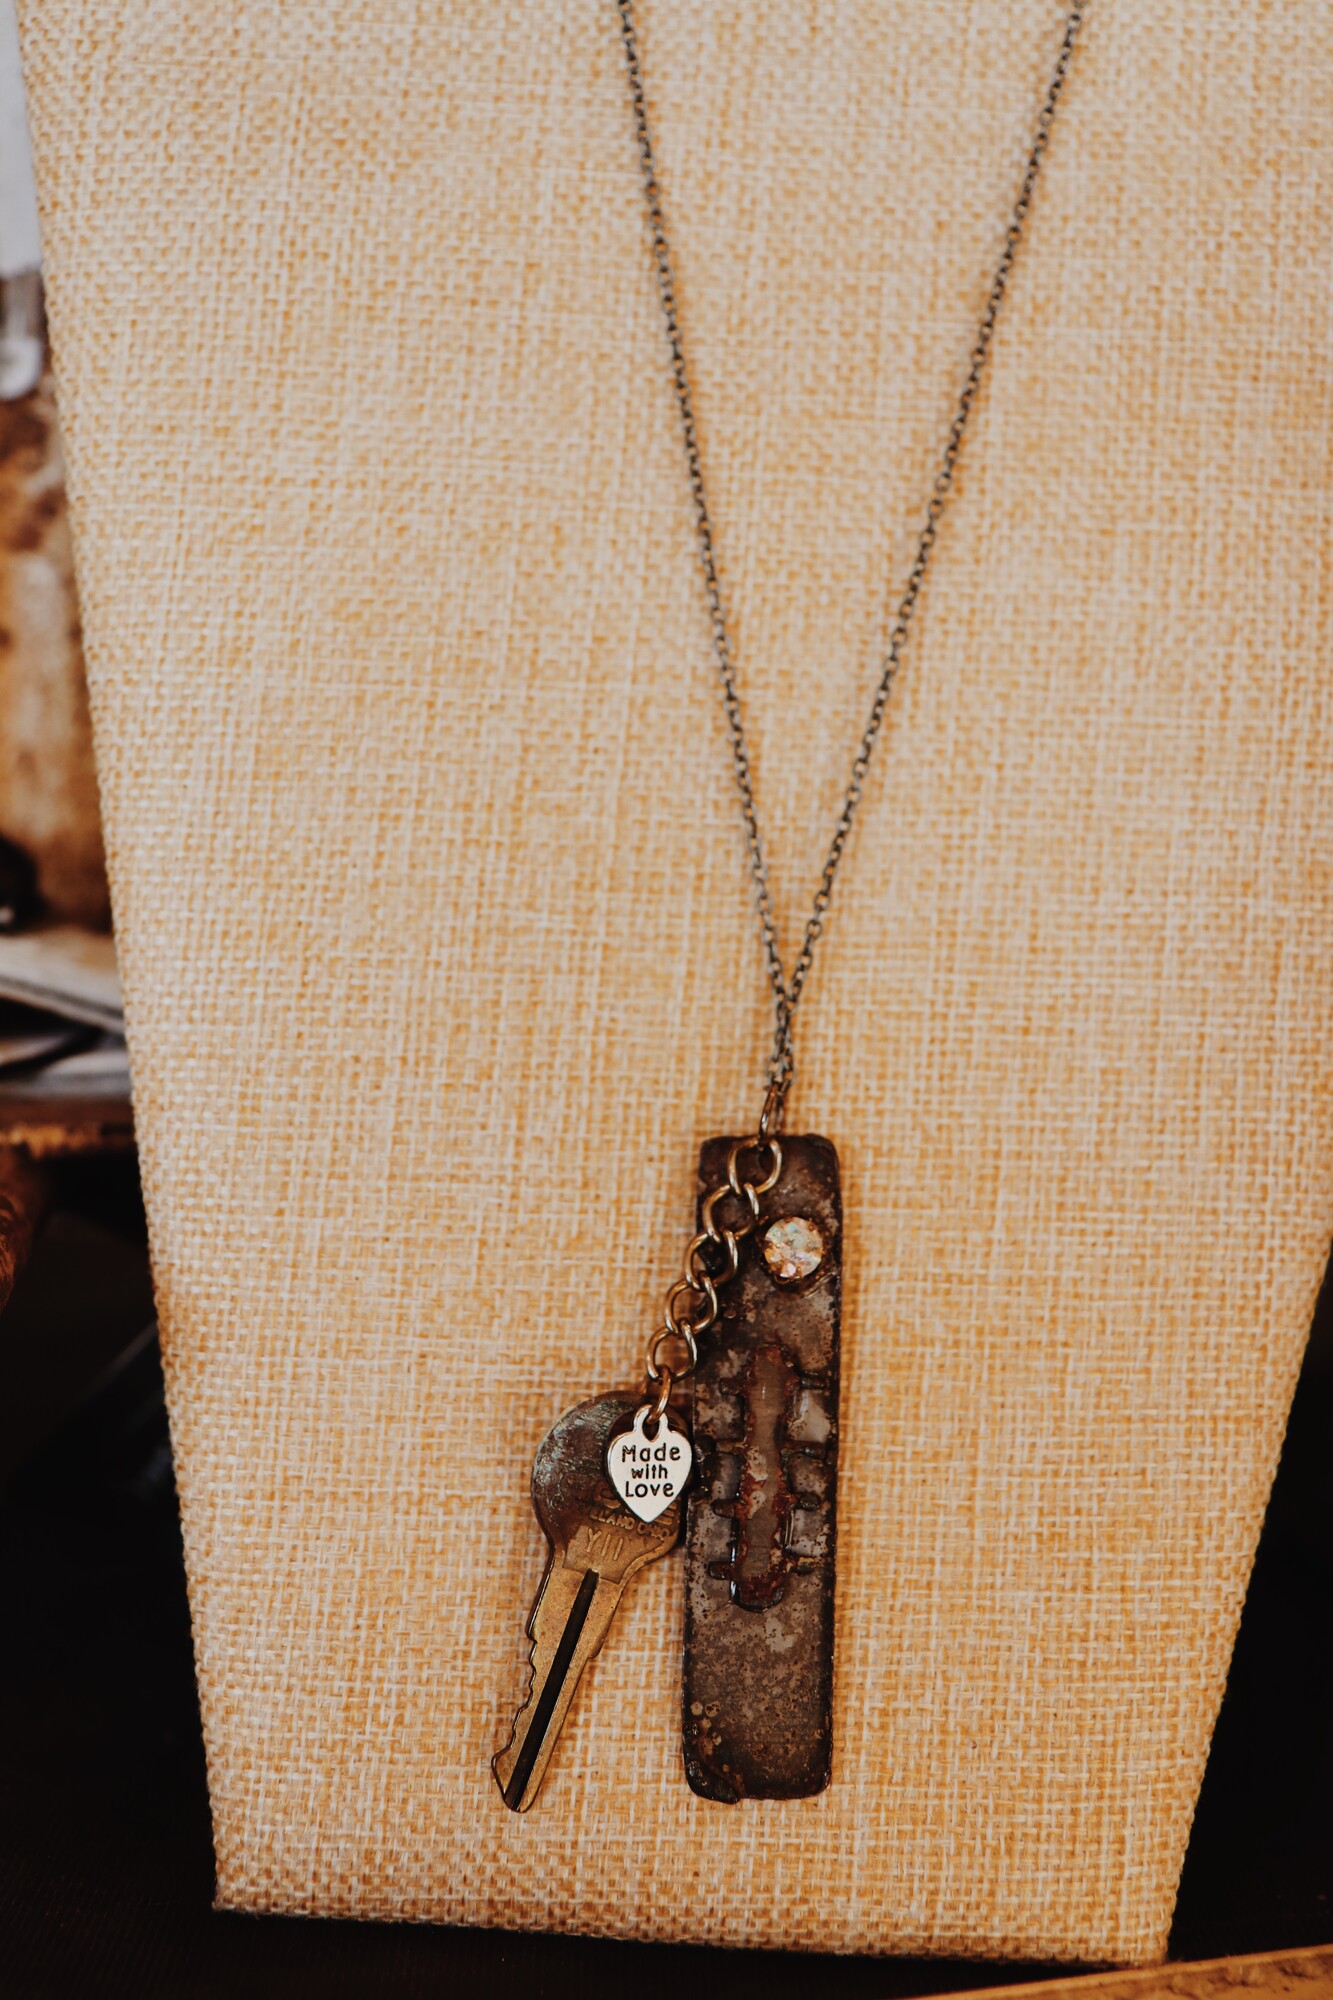 This necklace from Kelli Hawk Designs was handmade from vintage pieces! The centerpiece features two vintage metal pieces, one of which is an old key with a made with love tag attached. This hangs on a 20 inch chain.